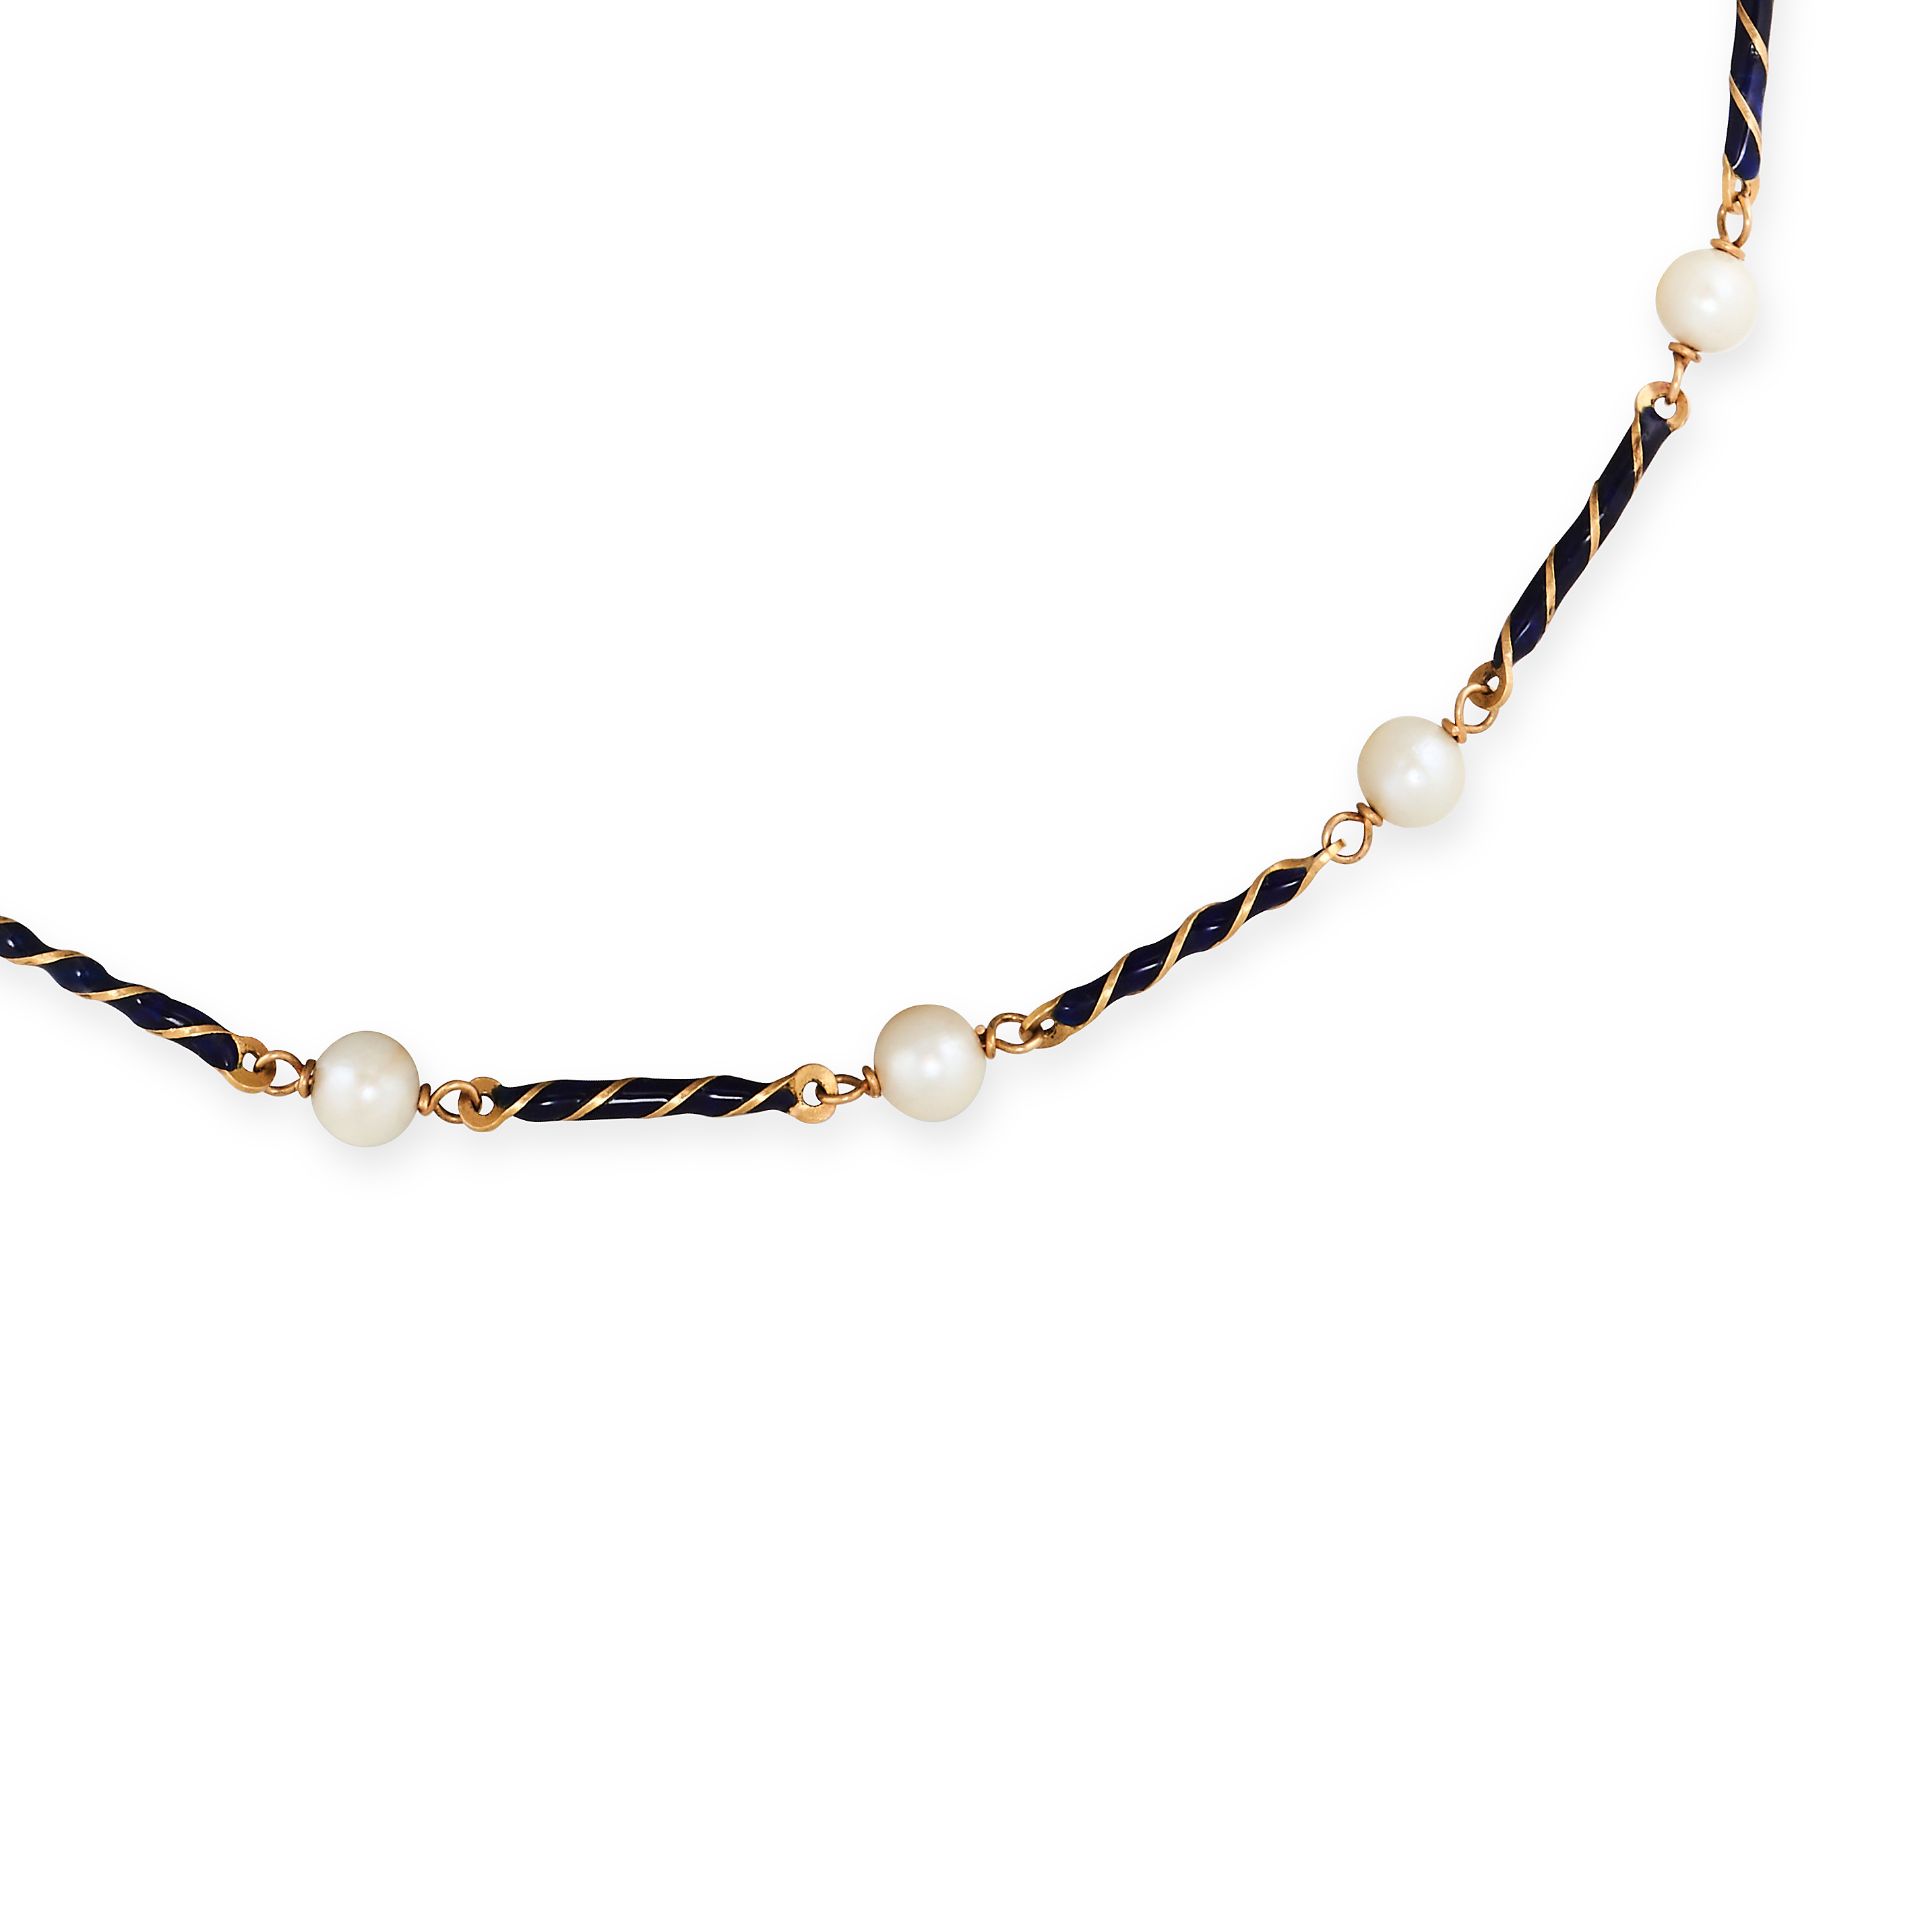 A PEARL AND ENAMEL NECKLACE comprising a row of pearls accented by twisted links relieved in blue... - Image 2 of 2